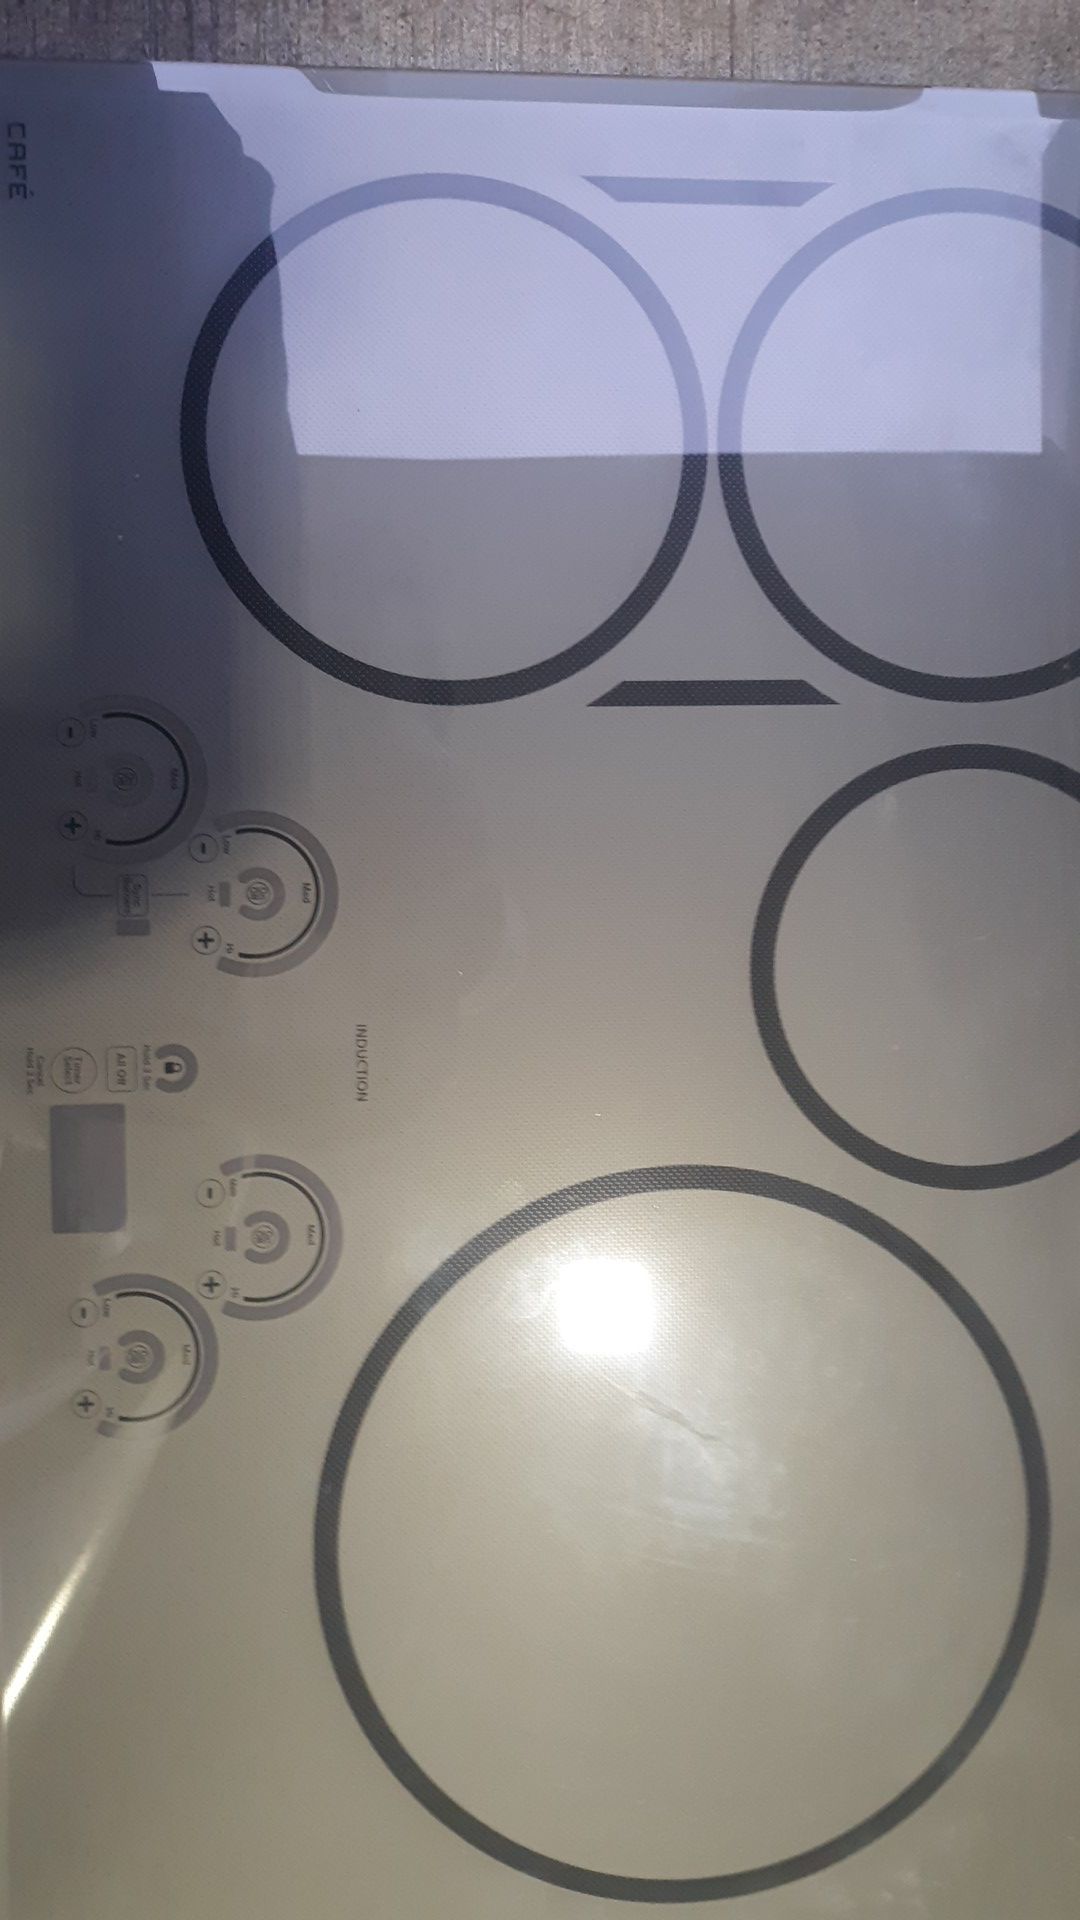 Brand new GE Cafe induction cooktop